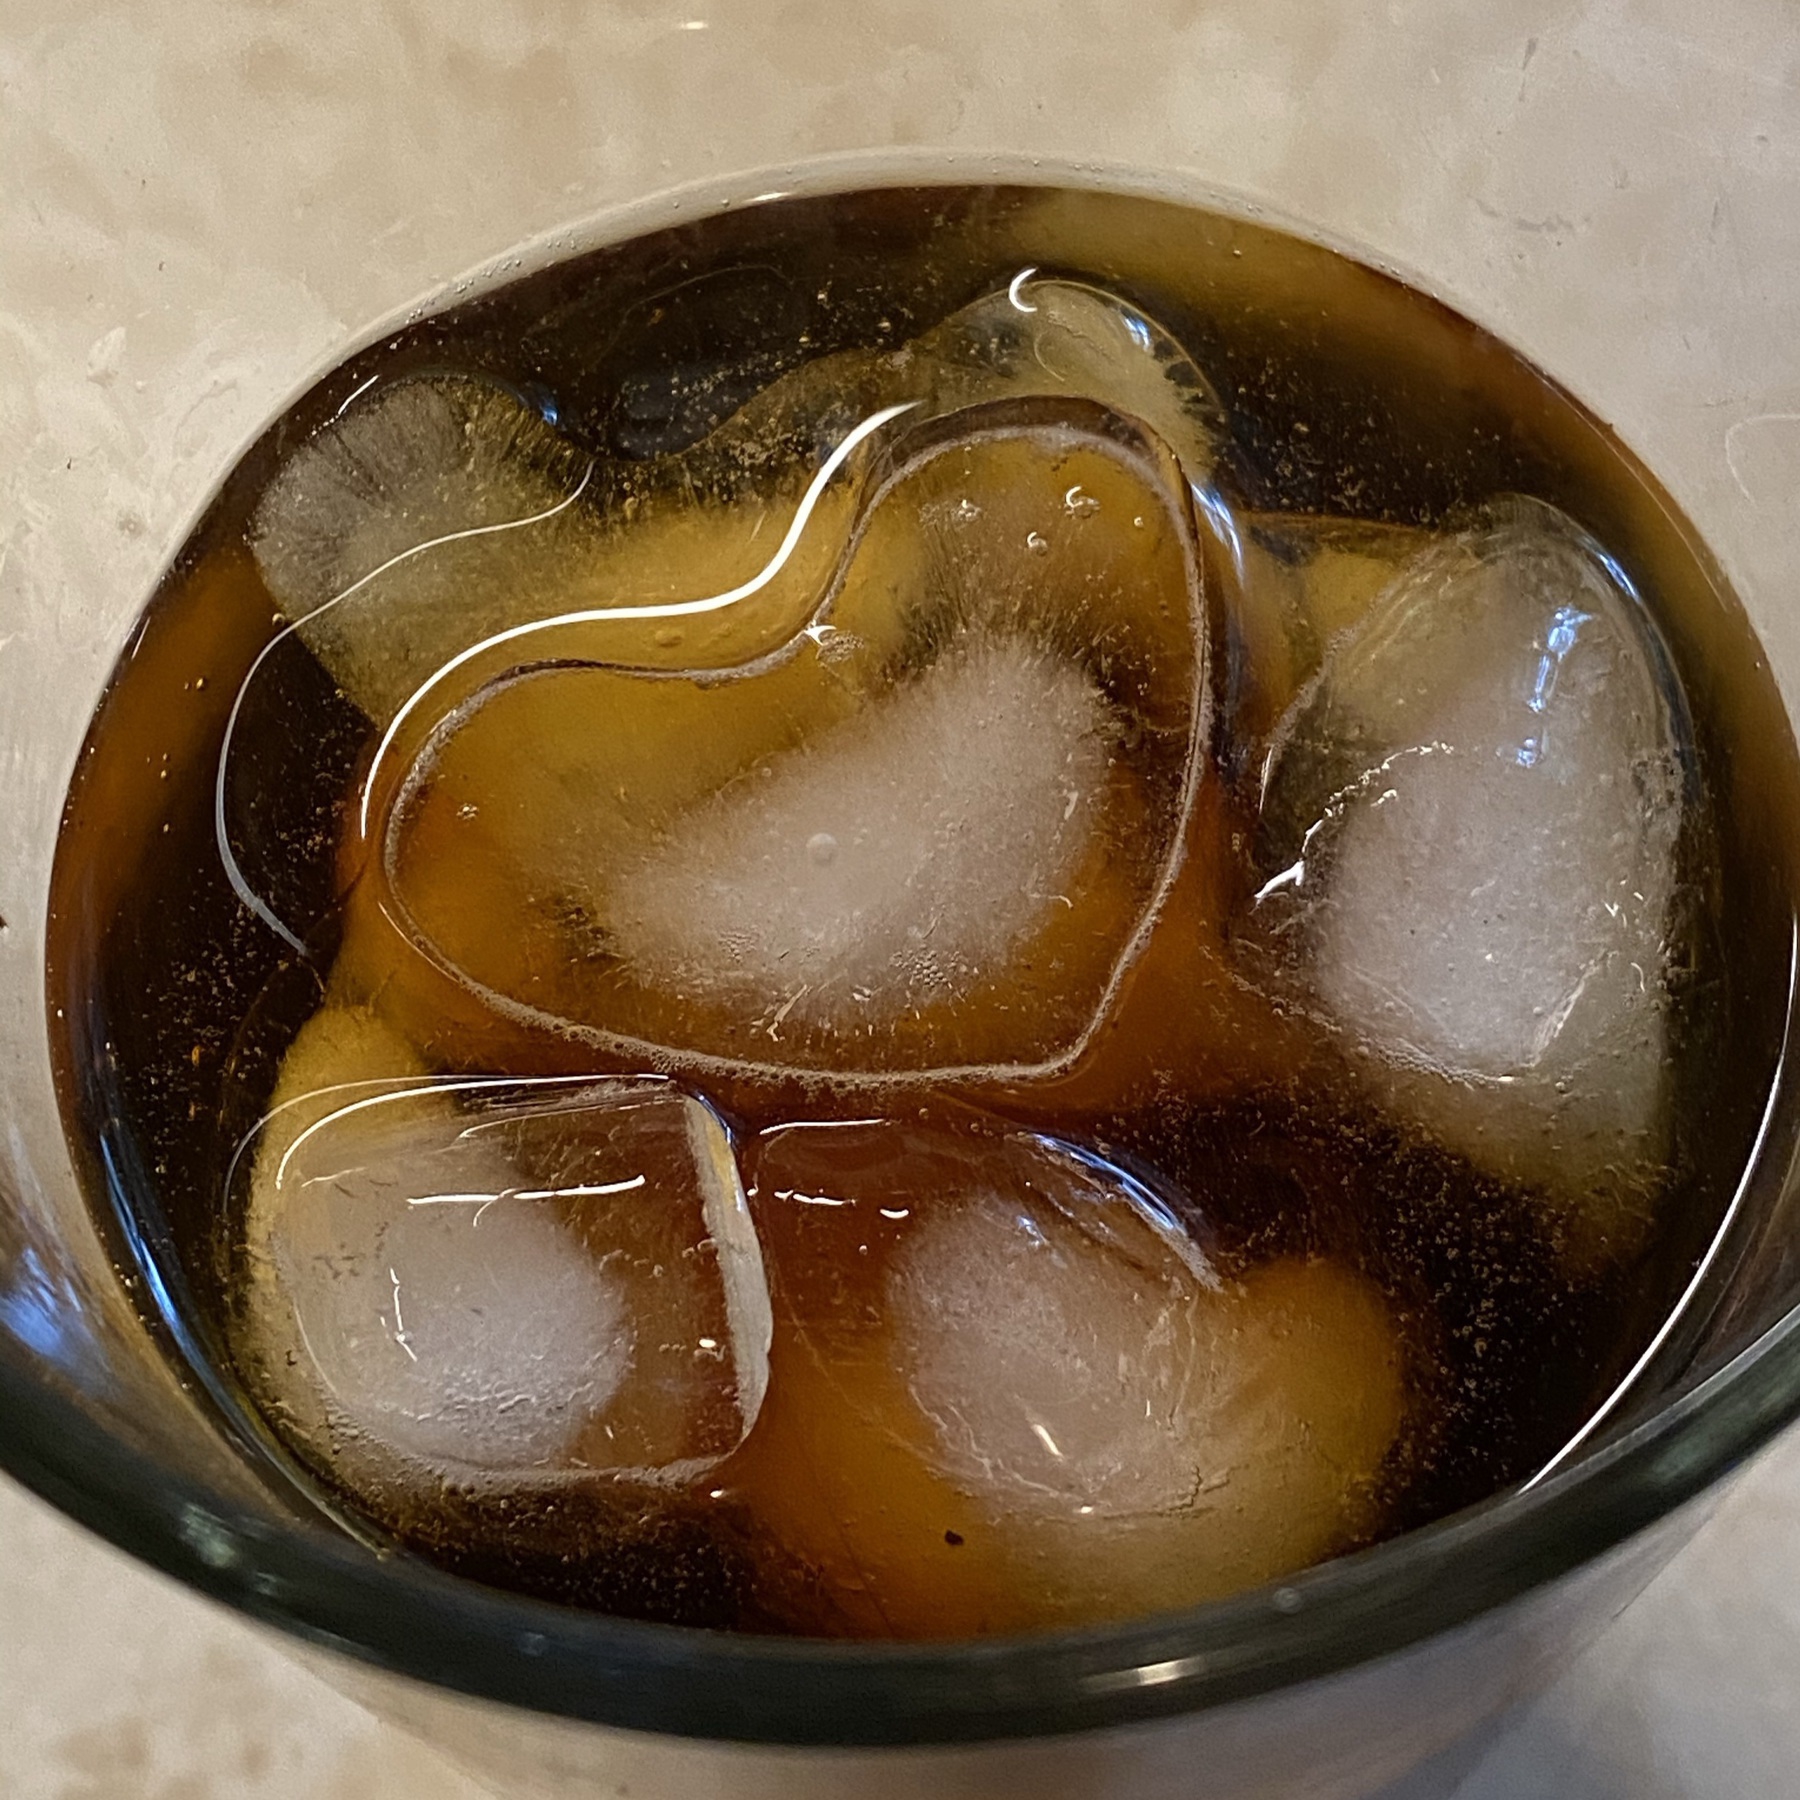 Cold brewed coffee in glass with ice cubes.